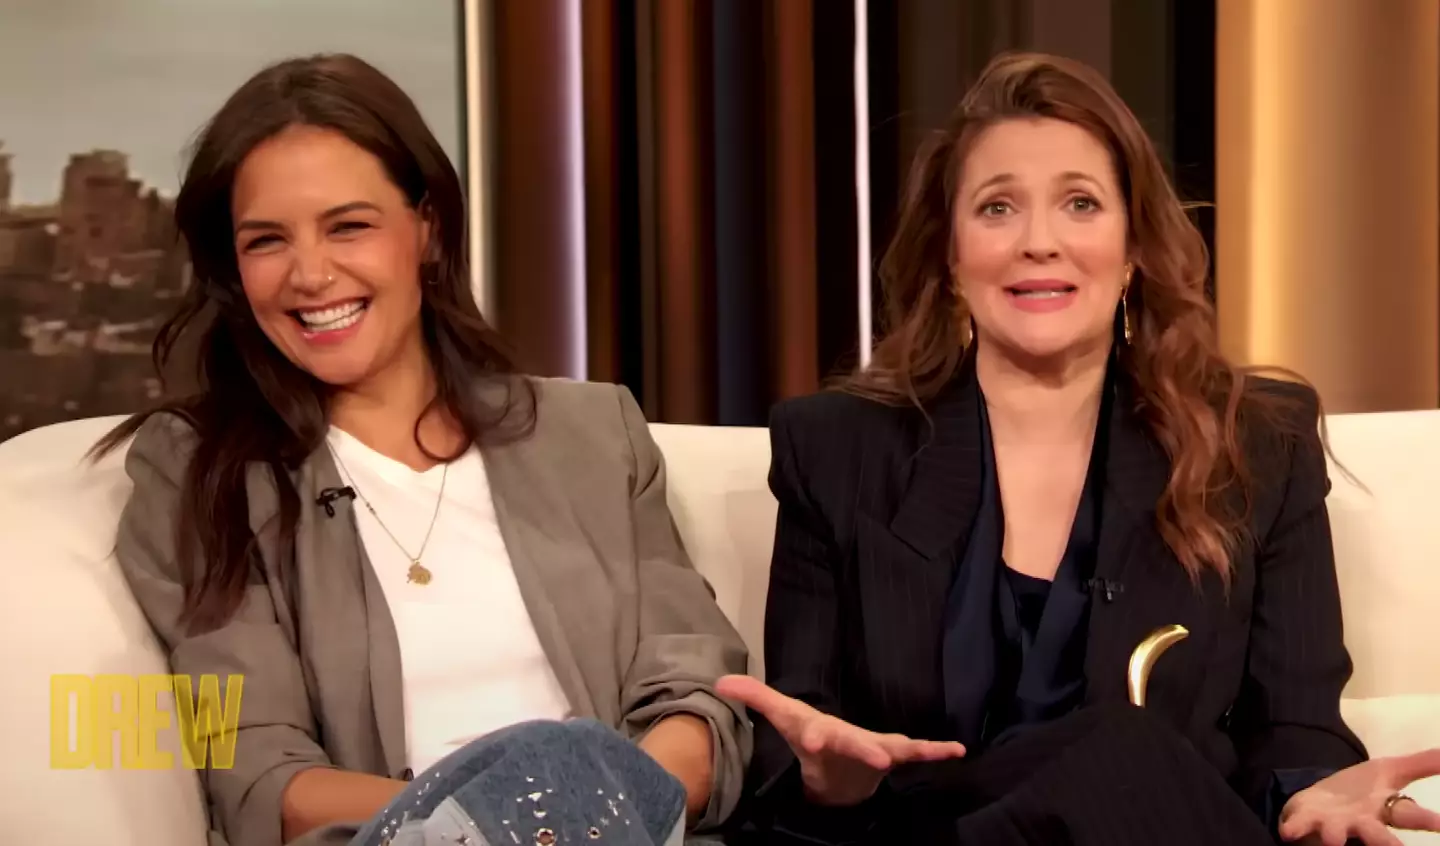 Katie Holmes opened up about her outfit choice to Drew Barrymore.